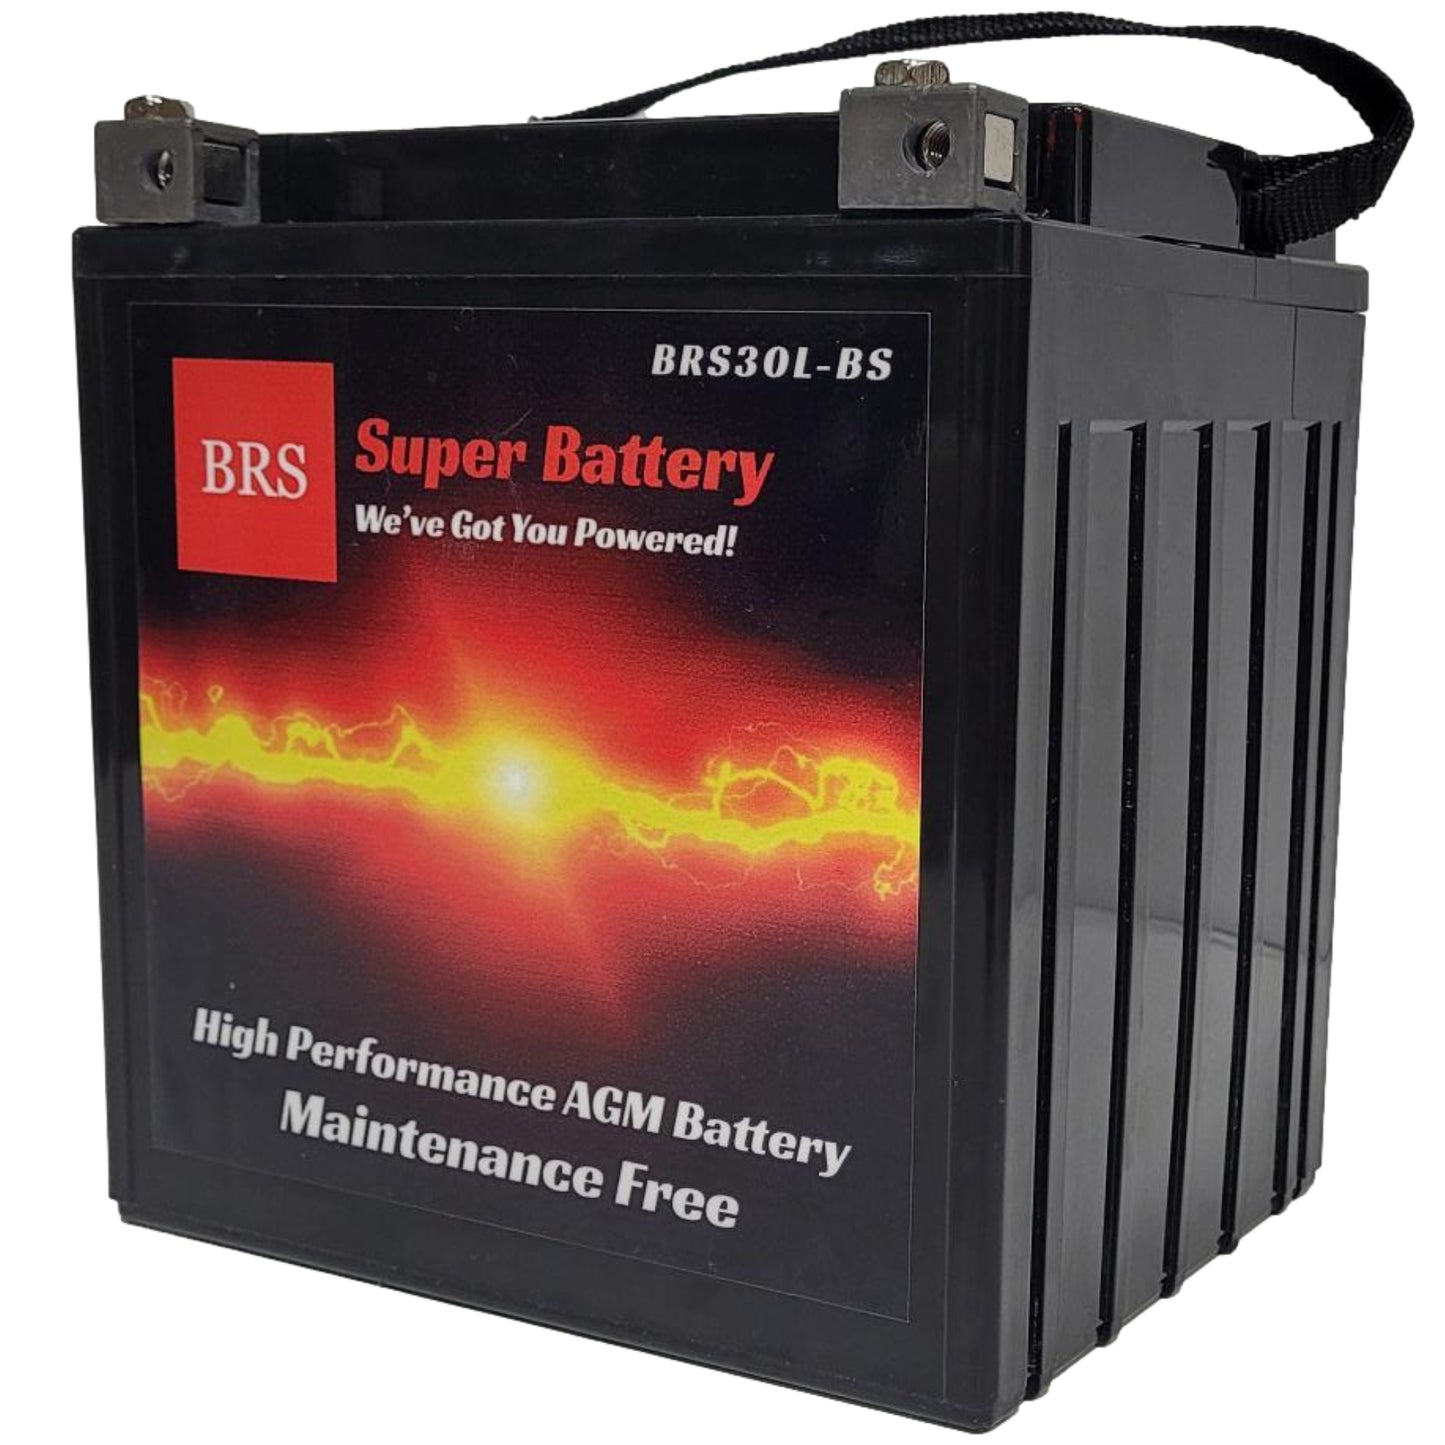 WPX30L-BS 12v High Performance Sealed AGM PowerSport 2 Year Battery - BRS Super Battery